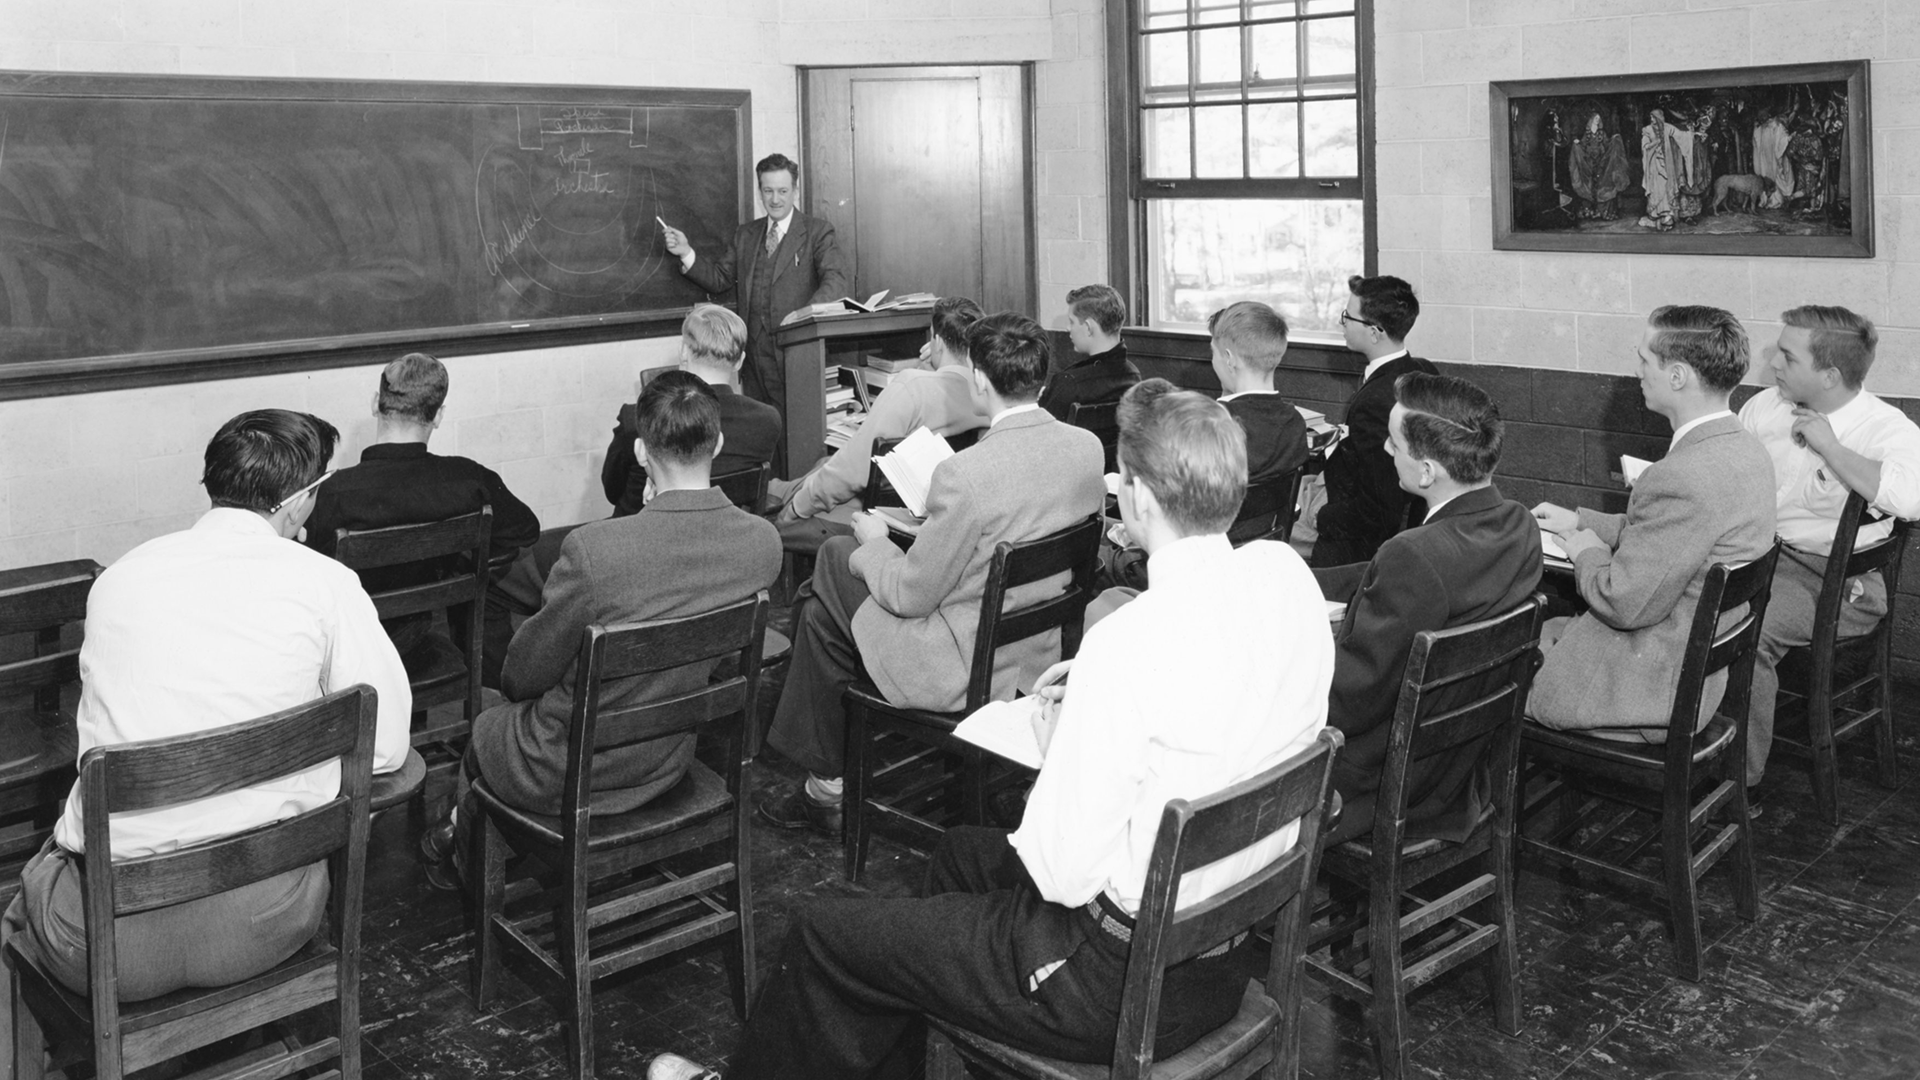 vintage image of students in a classroom